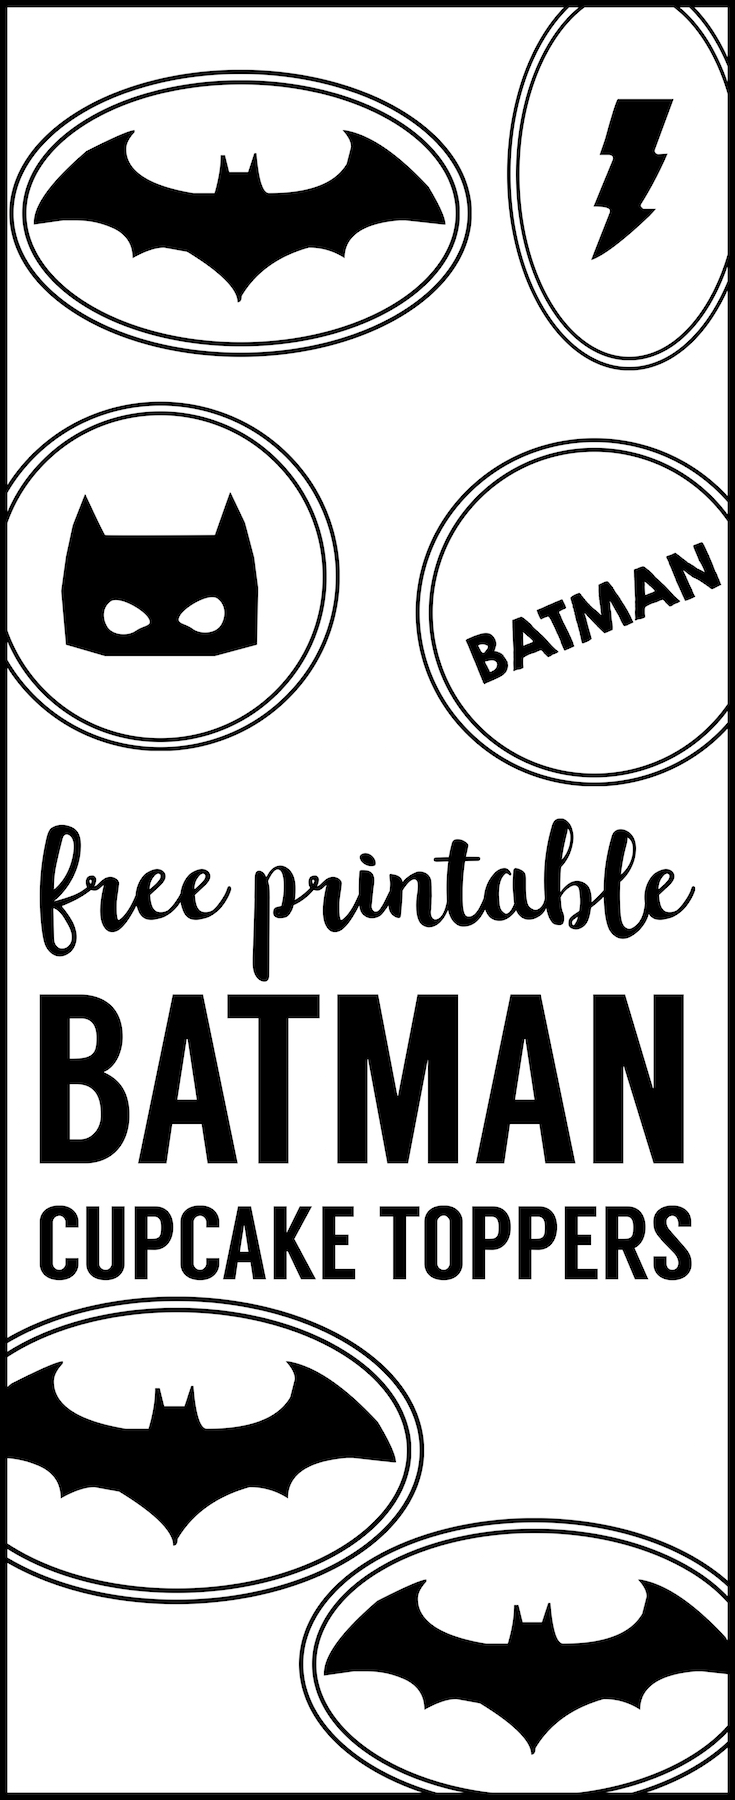 Batman Cupcake Toppers printable. Easy DIY batman cupcake decorations for a birthday party, Halloween party, or boy baby shower decorations. 